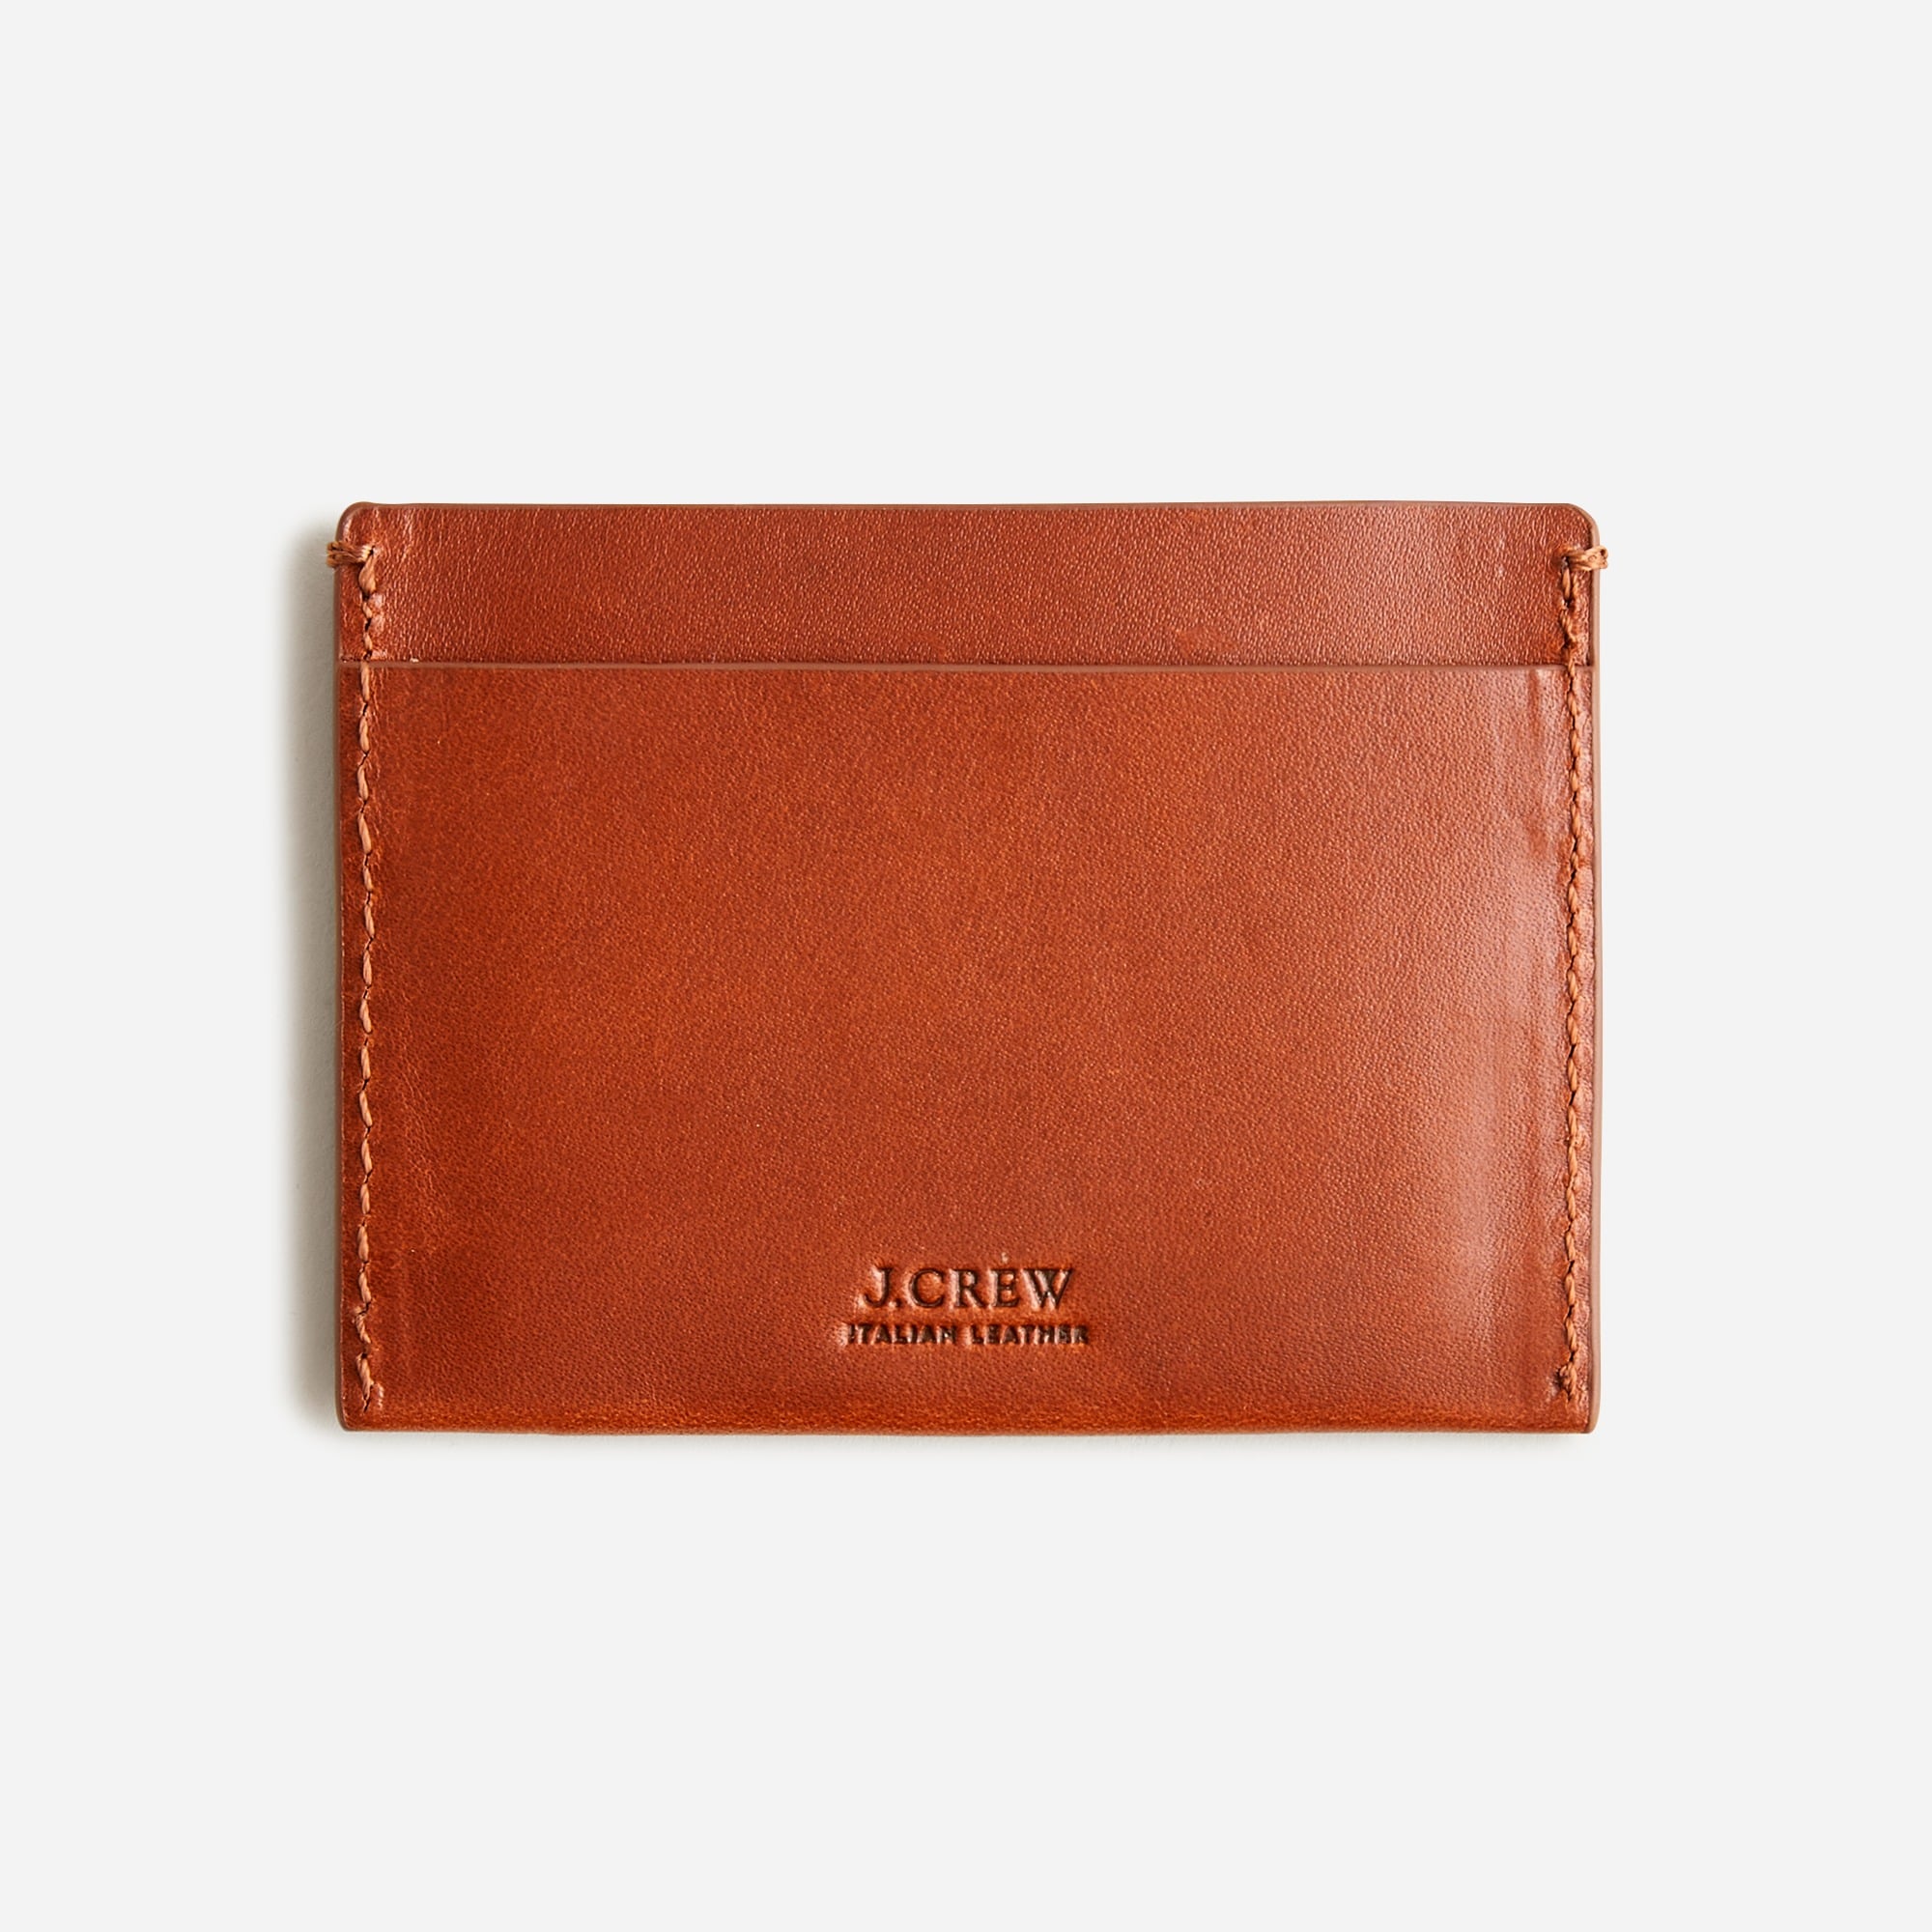 J.Crew Men's Double-Sided Cardholder (Size One Size)